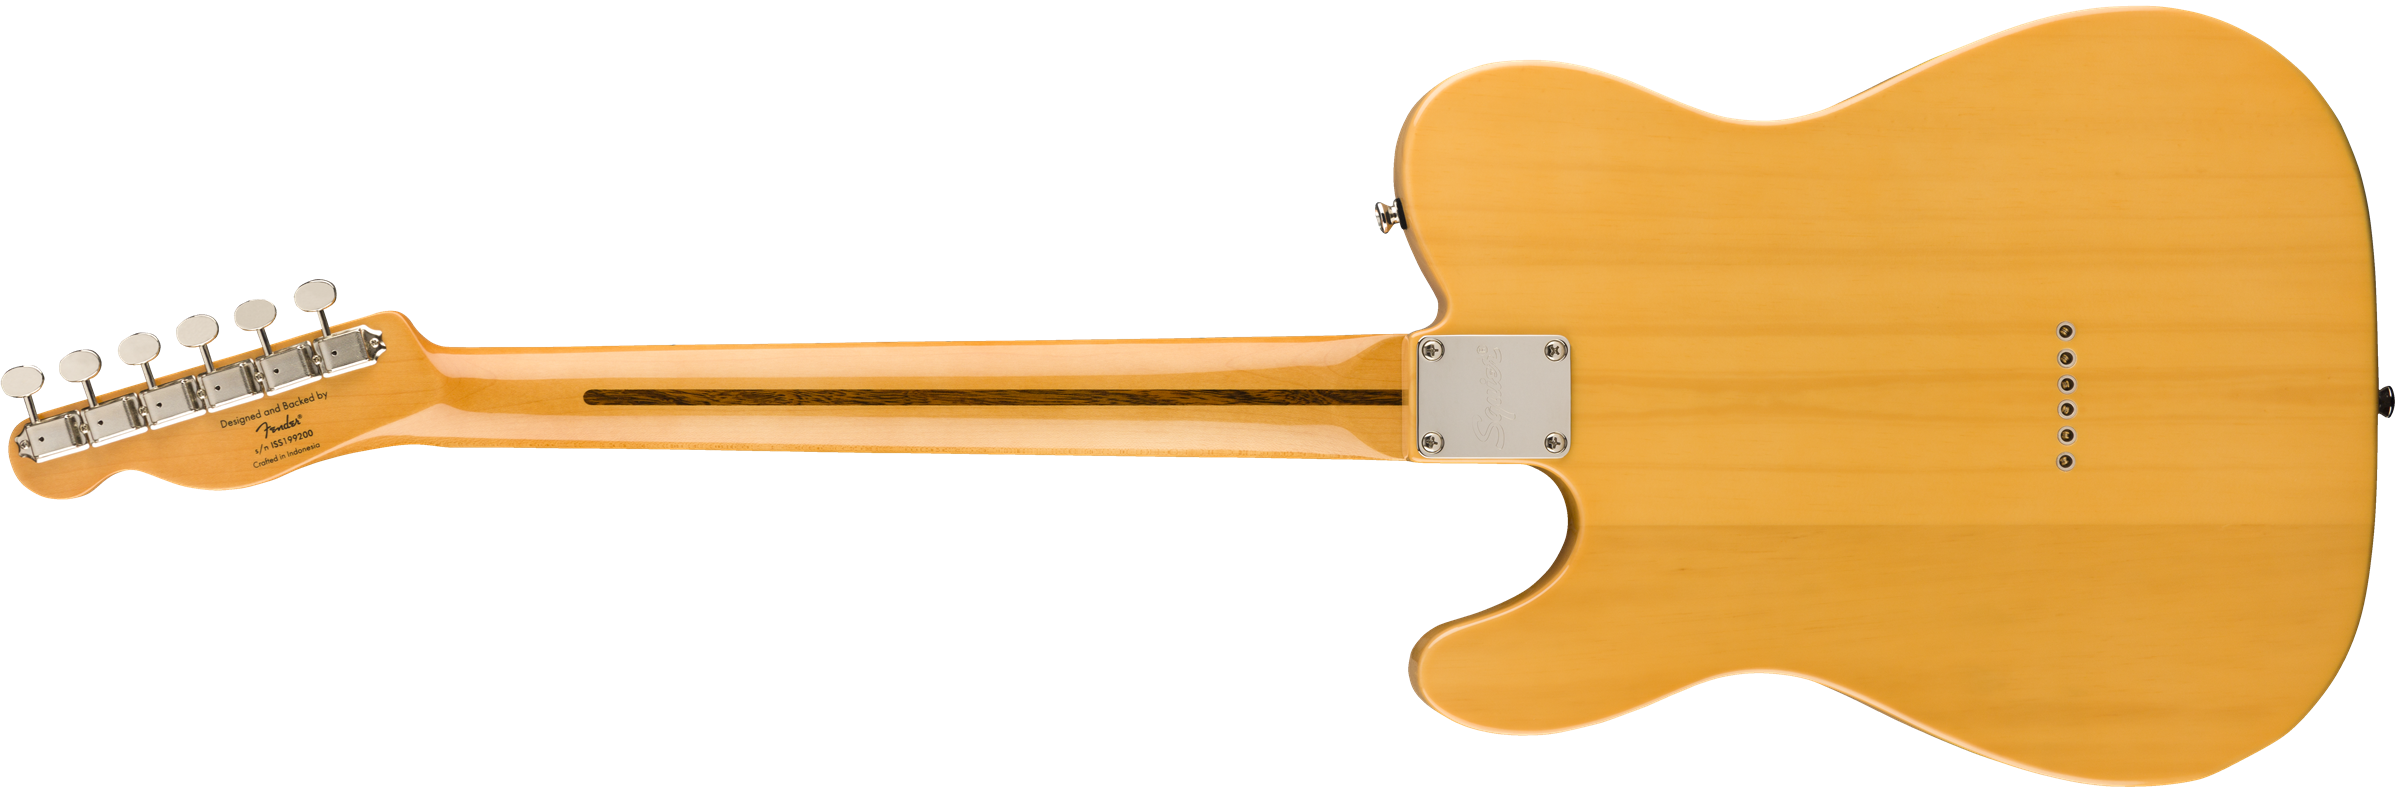 Squier Classic Vibe 50s Telecaster Maple Fingerboard Butterscotch Blonde 0374030550